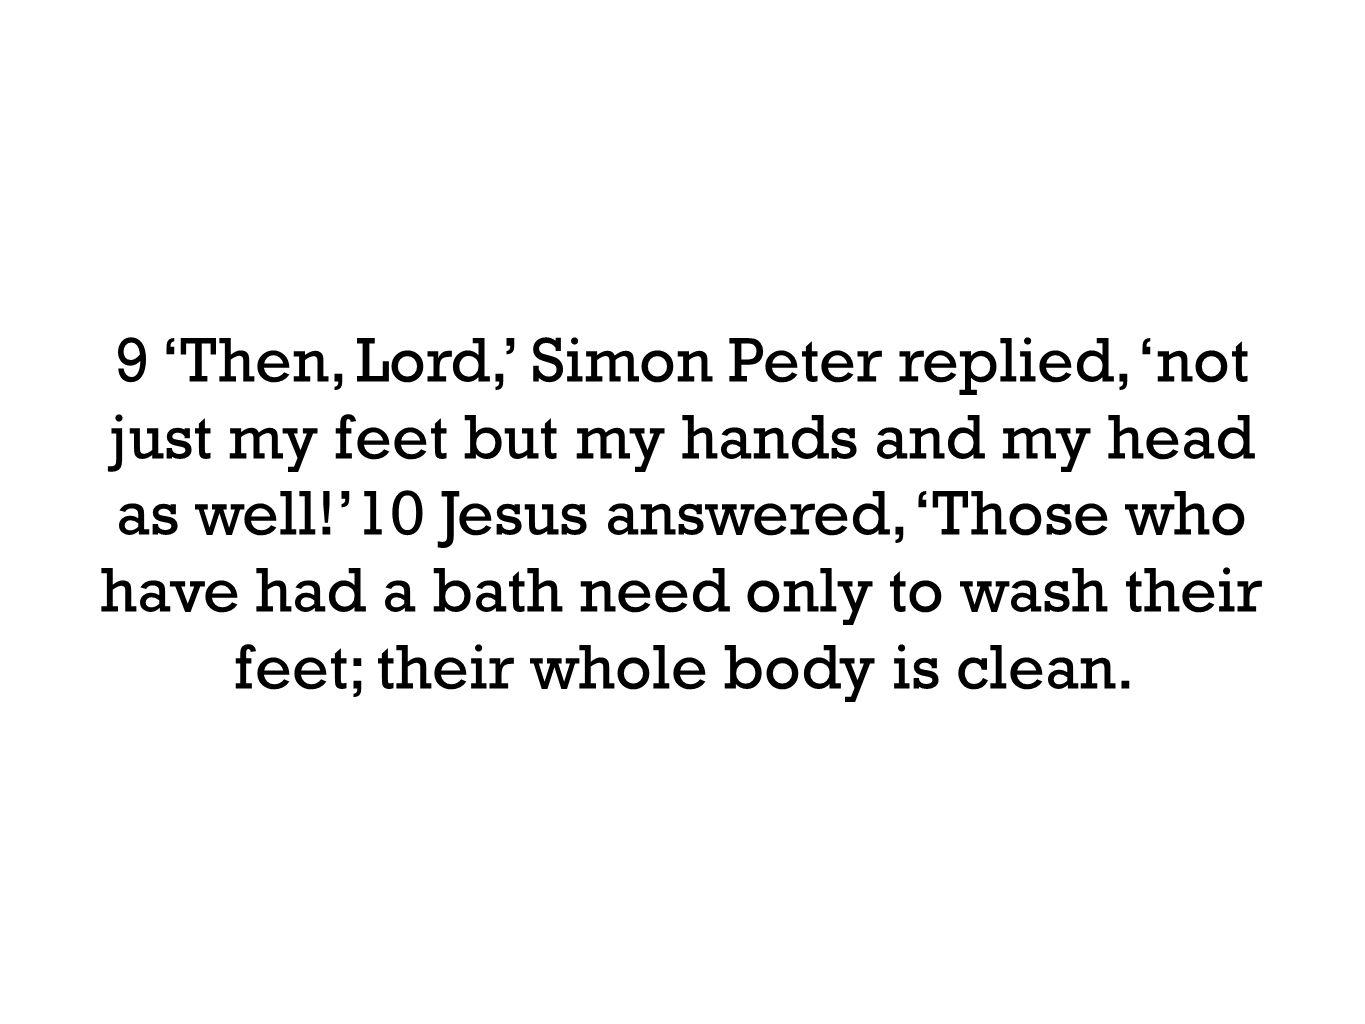 9 ‘Then, Lord,’ Simon Peter replied, ‘not just my feet but my hands and my head as well!’10 Jesus answered, ‘Those who have had a bath need only to wash their feet; their whole body is clean.